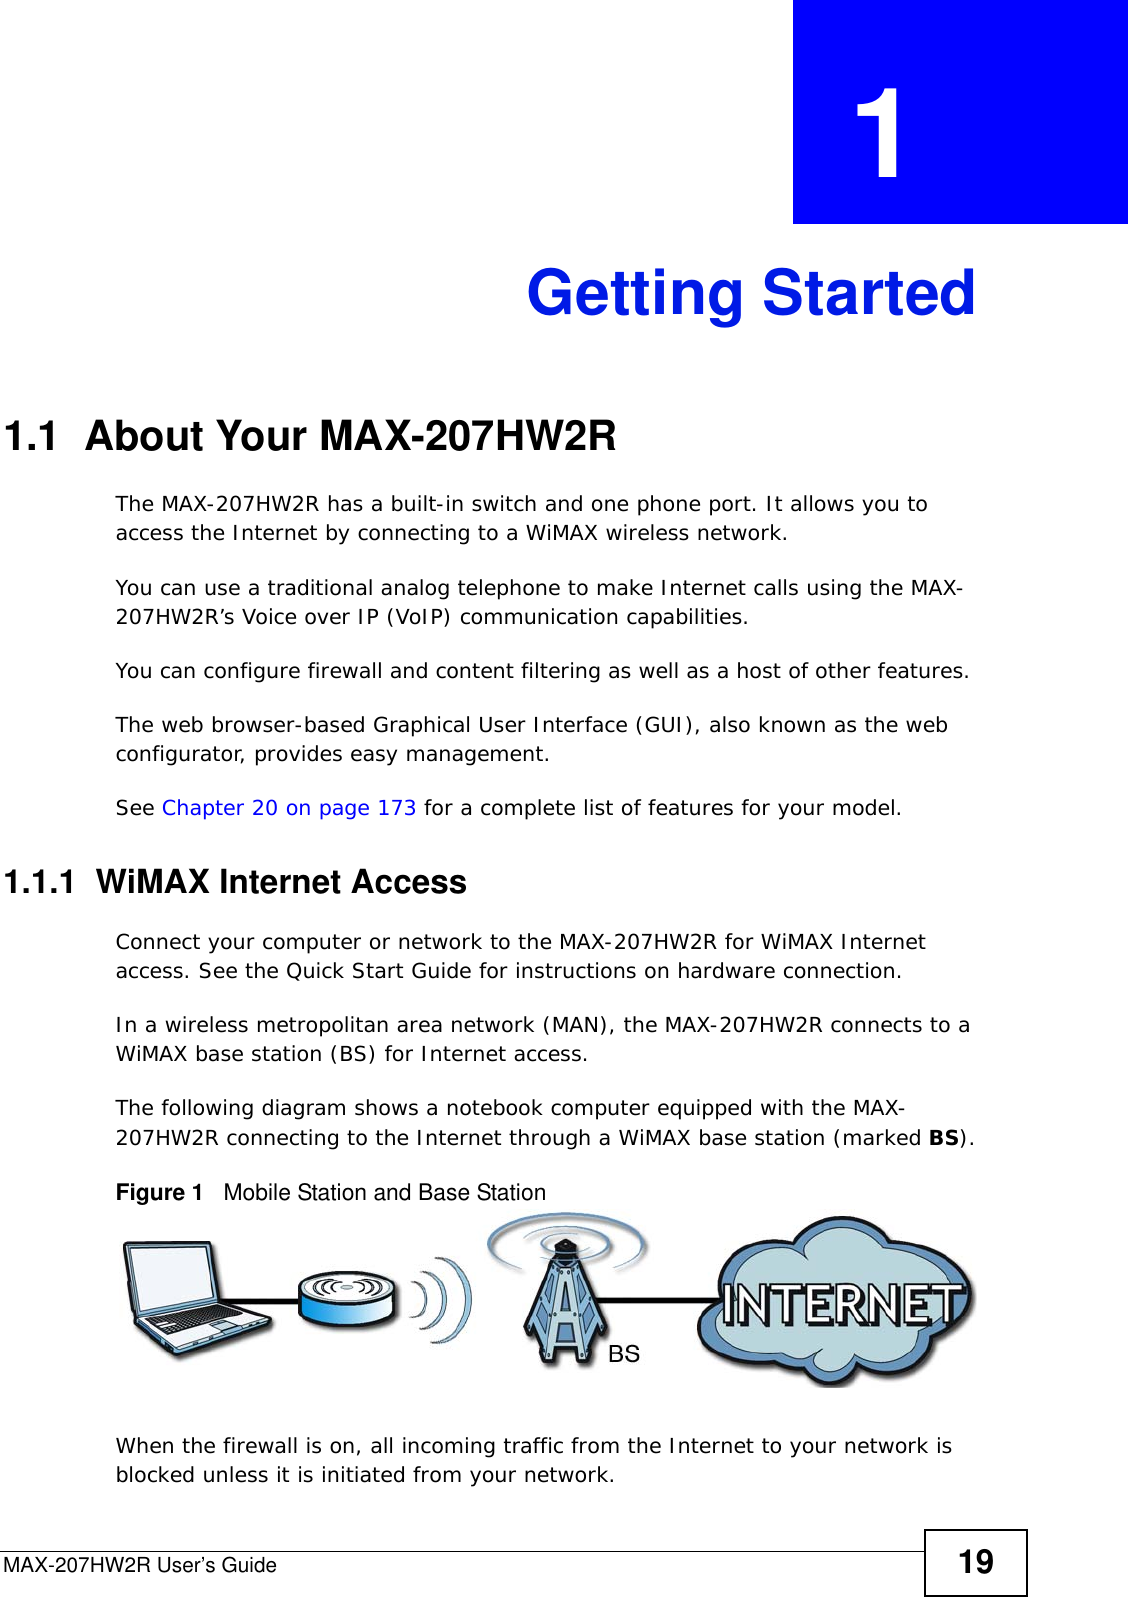 MAX-207HW2R User’s Guide 19CHAPTER  1 Getting Started1.1  About Your MAX-207HW2R The MAX-207HW2R has a built-in switch and one phone port. It allows you to access the Internet by connecting to a WiMAX wireless network. You can use a traditional analog telephone to make Internet calls using the MAX-207HW2R’s Voice over IP (VoIP) communication capabilities. You can configure firewall and content filtering as well as a host of other features. The web browser-based Graphical User Interface (GUI), also known as the web configurator, provides easy management.See Chapter 20 on page 173 for a complete list of features for your model.1.1.1  WiMAX Internet AccessConnect your computer or network to the MAX-207HW2R for WiMAX Internet access. See the Quick Start Guide for instructions on hardware connection.In a wireless metropolitan area network (MAN), the MAX-207HW2R connects to a WiMAX base station (BS) for Internet access. The following diagram shows a notebook computer equipped with the MAX-207HW2R connecting to the Internet through a WiMAX base station (marked BS).Figure 1   Mobile Station and Base StationWhen the firewall is on, all incoming traffic from the Internet to your network is blocked unless it is initiated from your network. 